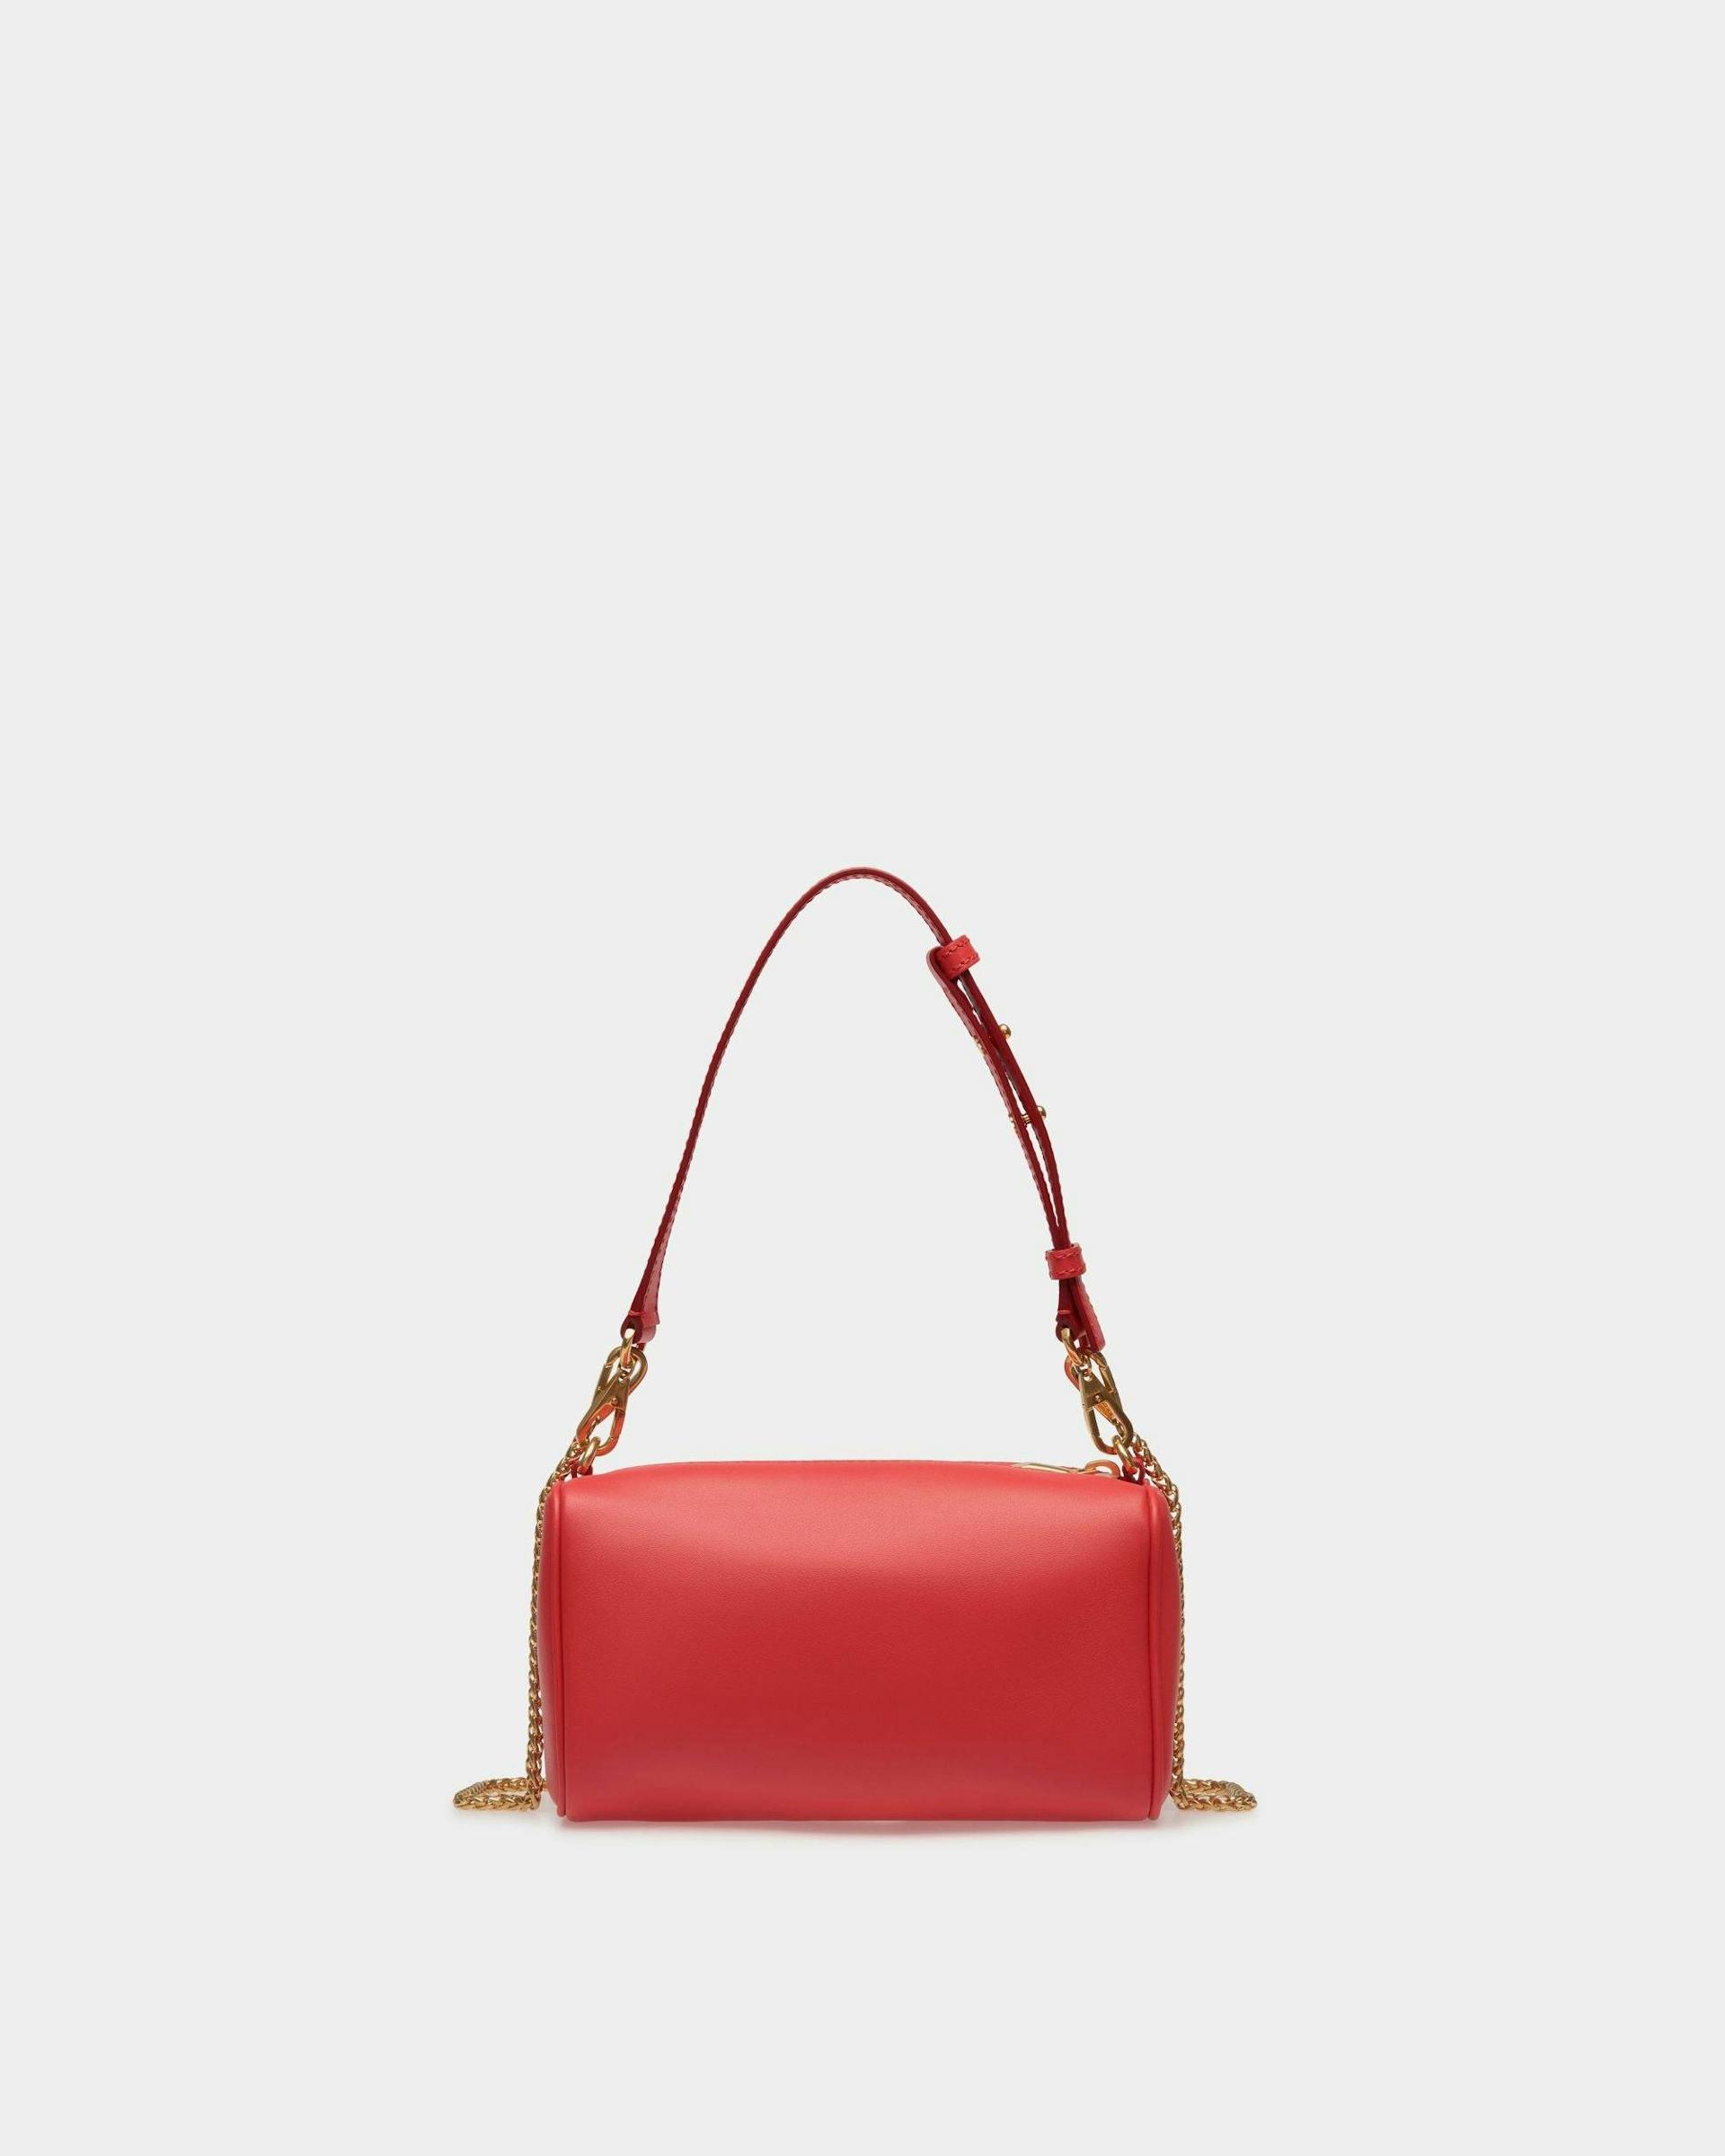 Women's Emblem Mini Bag In Red Leather | Bally | Still Life Back